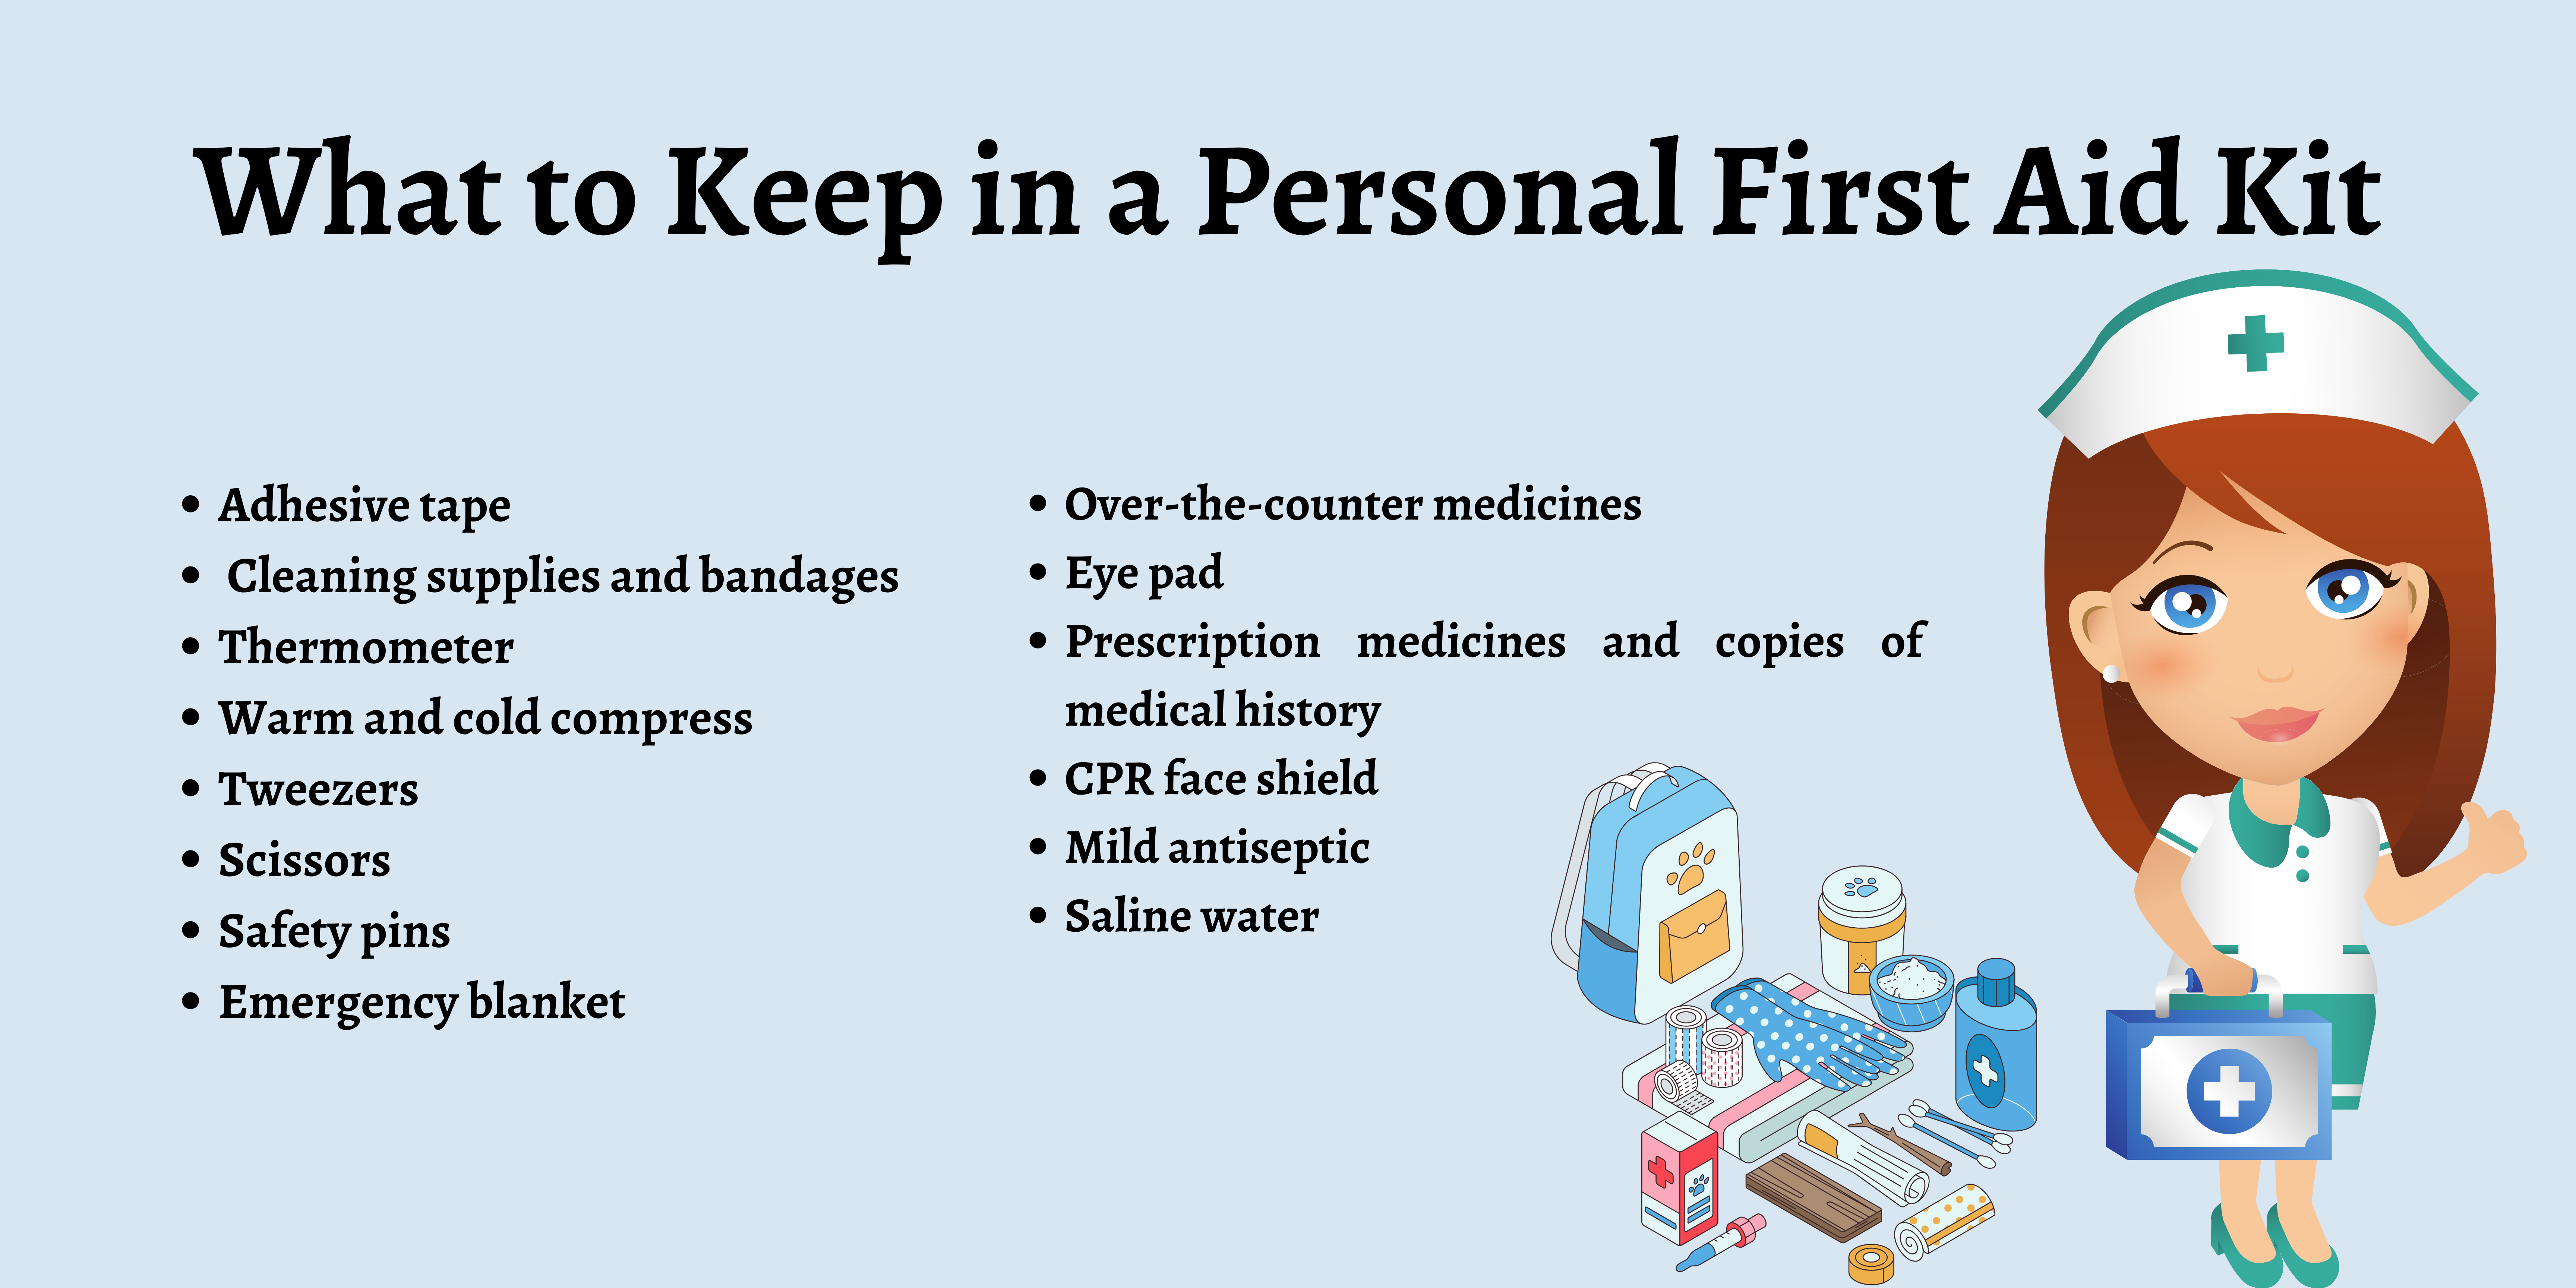 Personal First Aid Kit Checklist - First Aid for Free